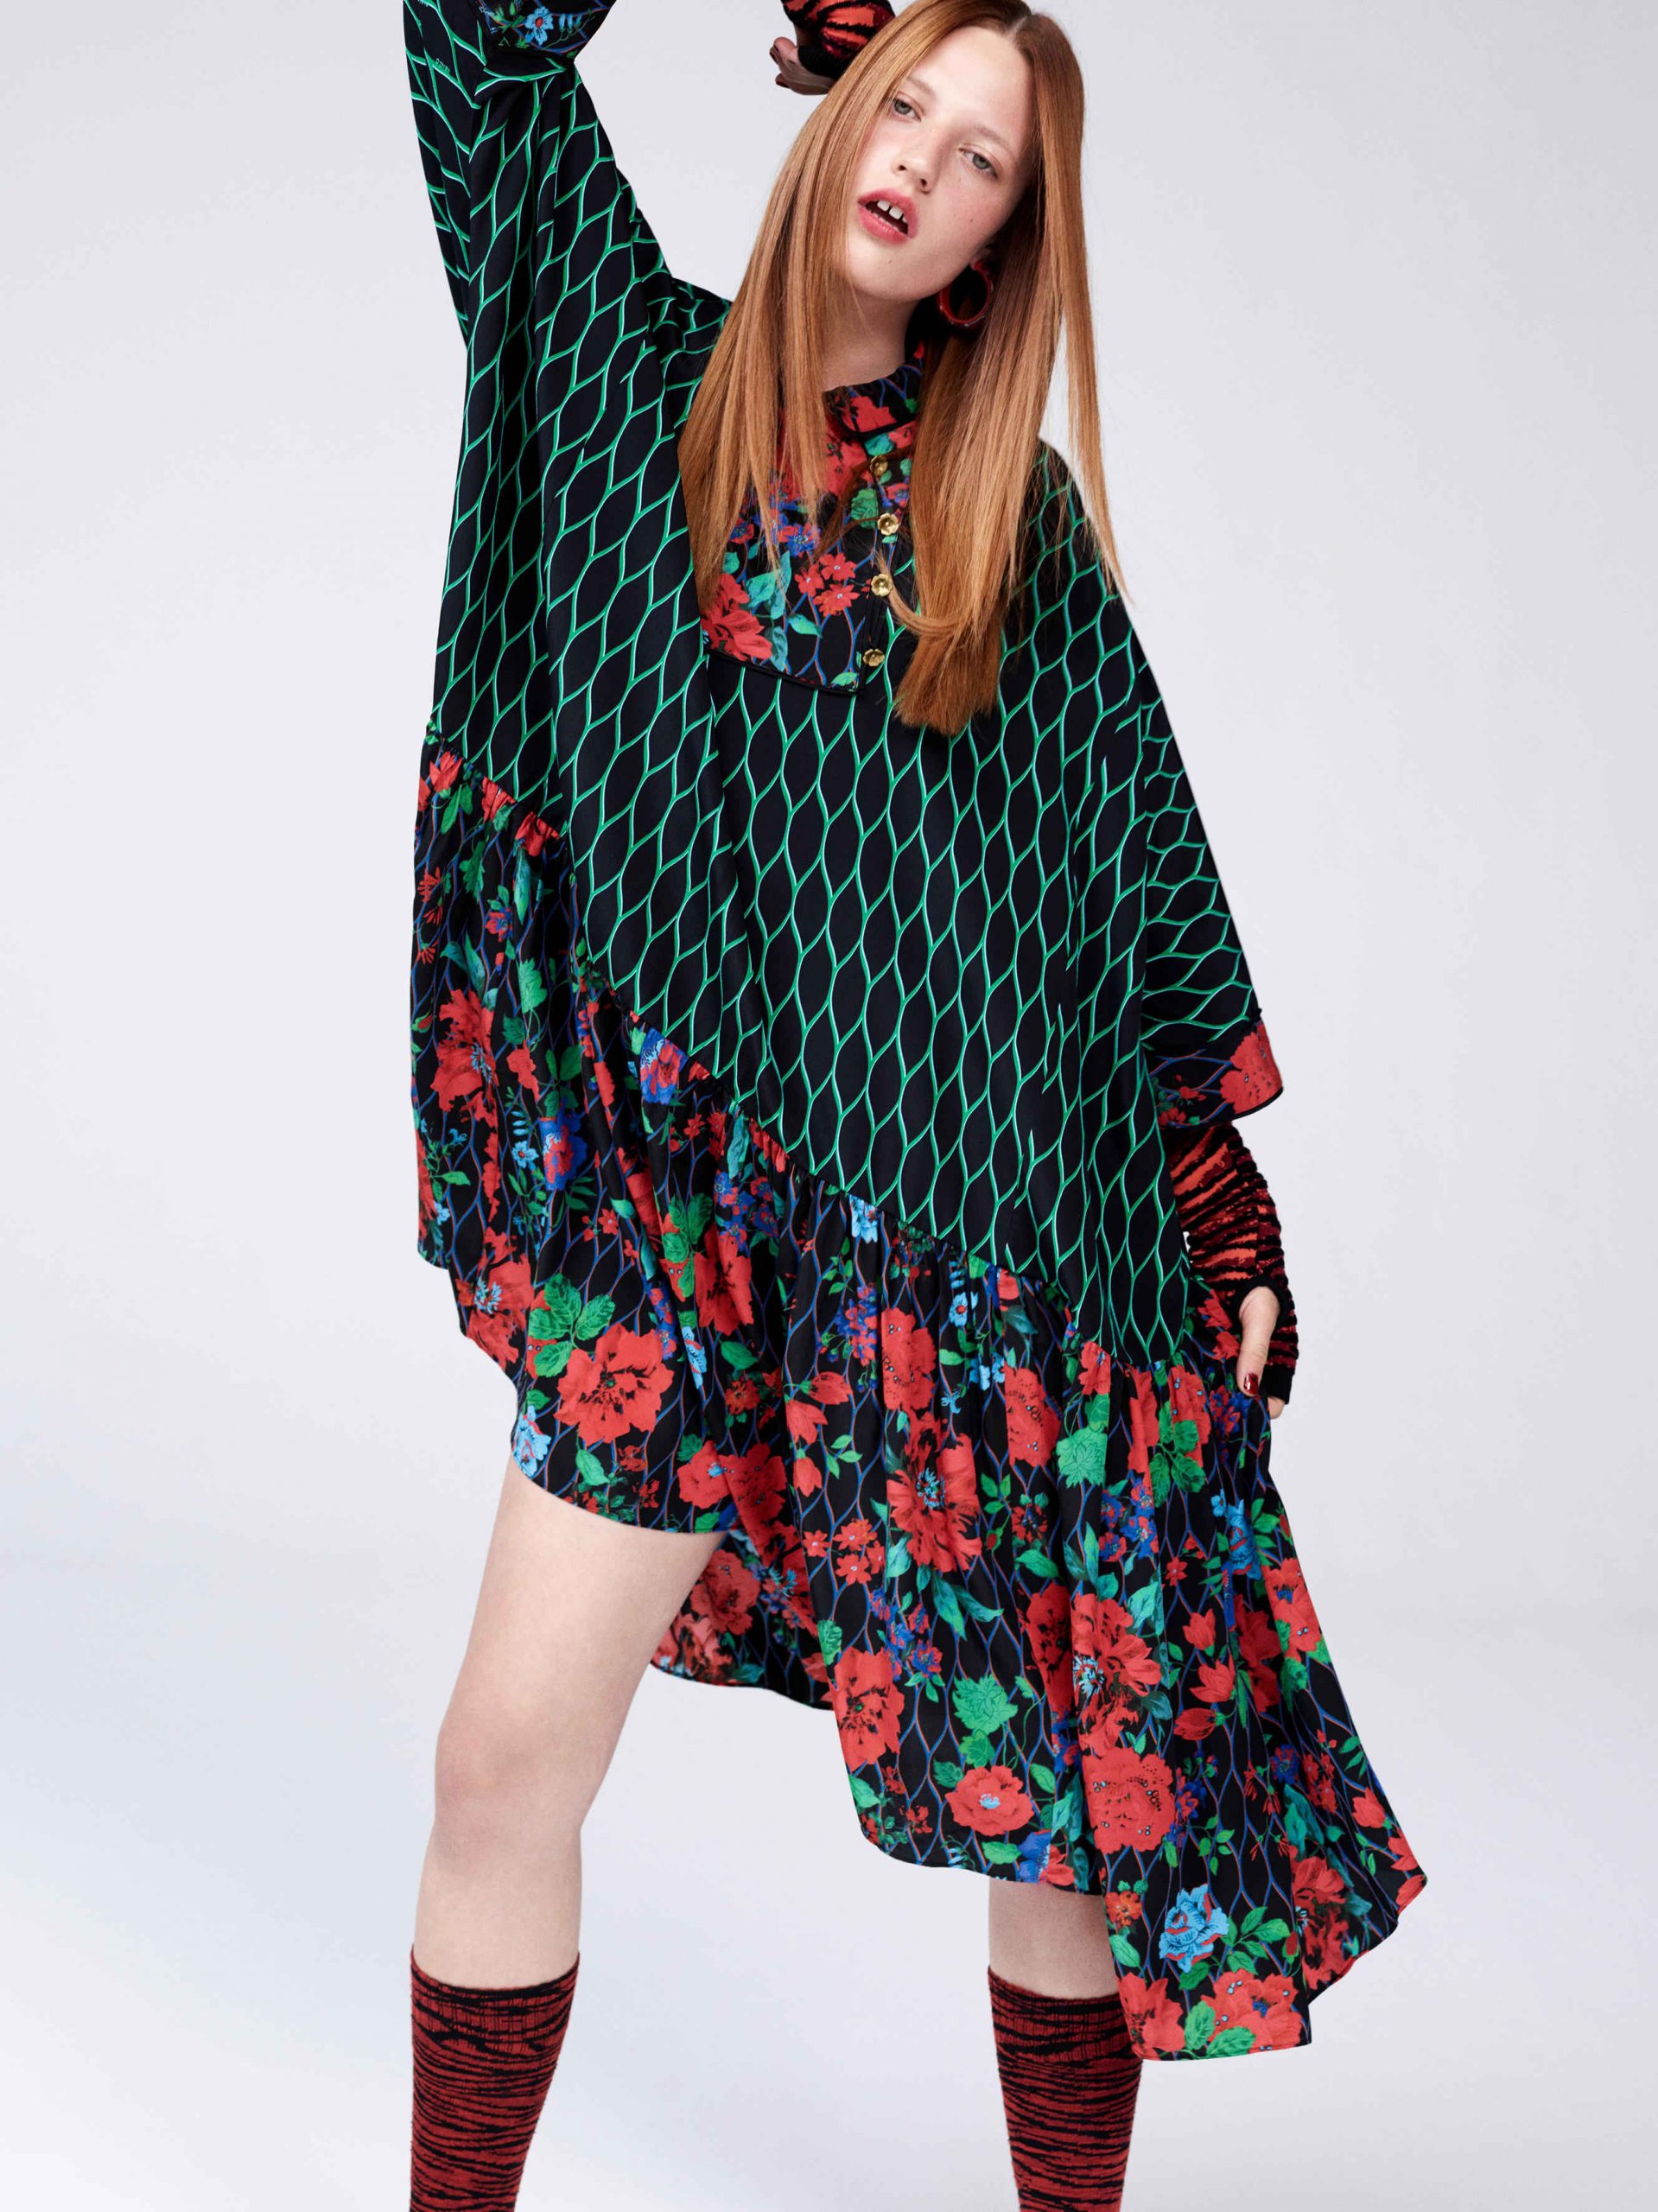 Kenzo For Hm Lookbook See The Photos  Teen Vogue